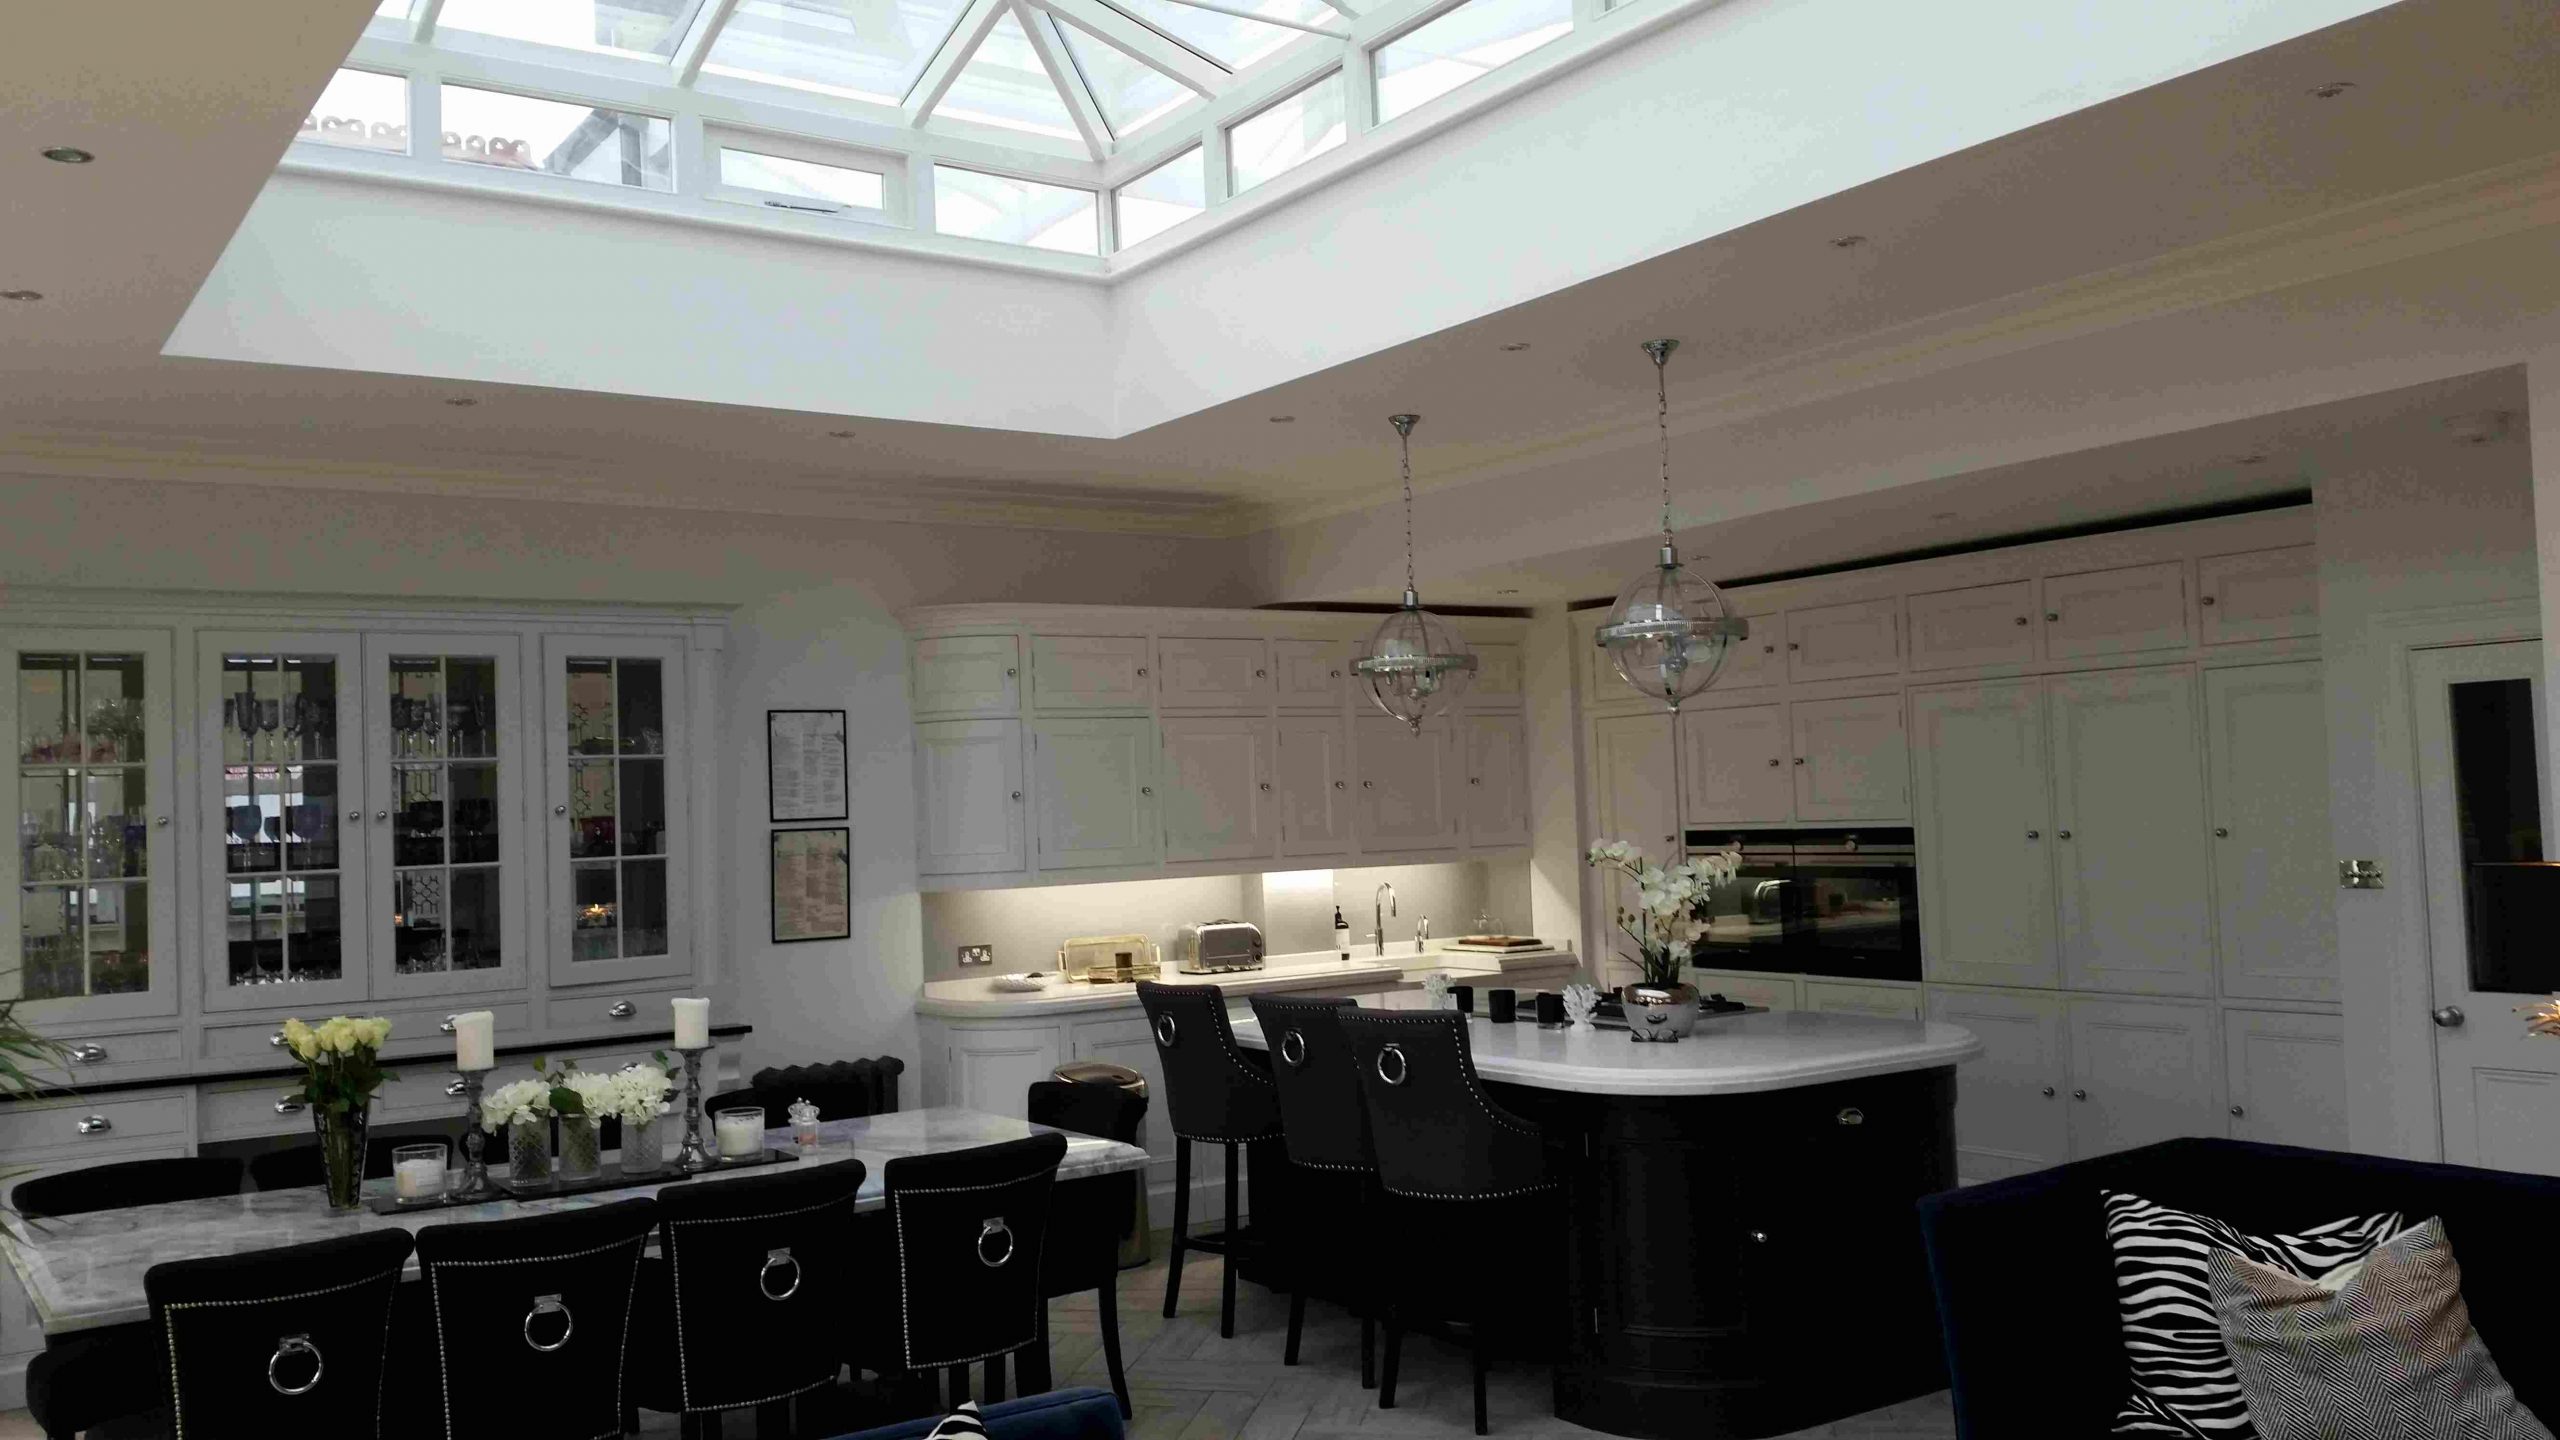 A large modern kitchen with skylight